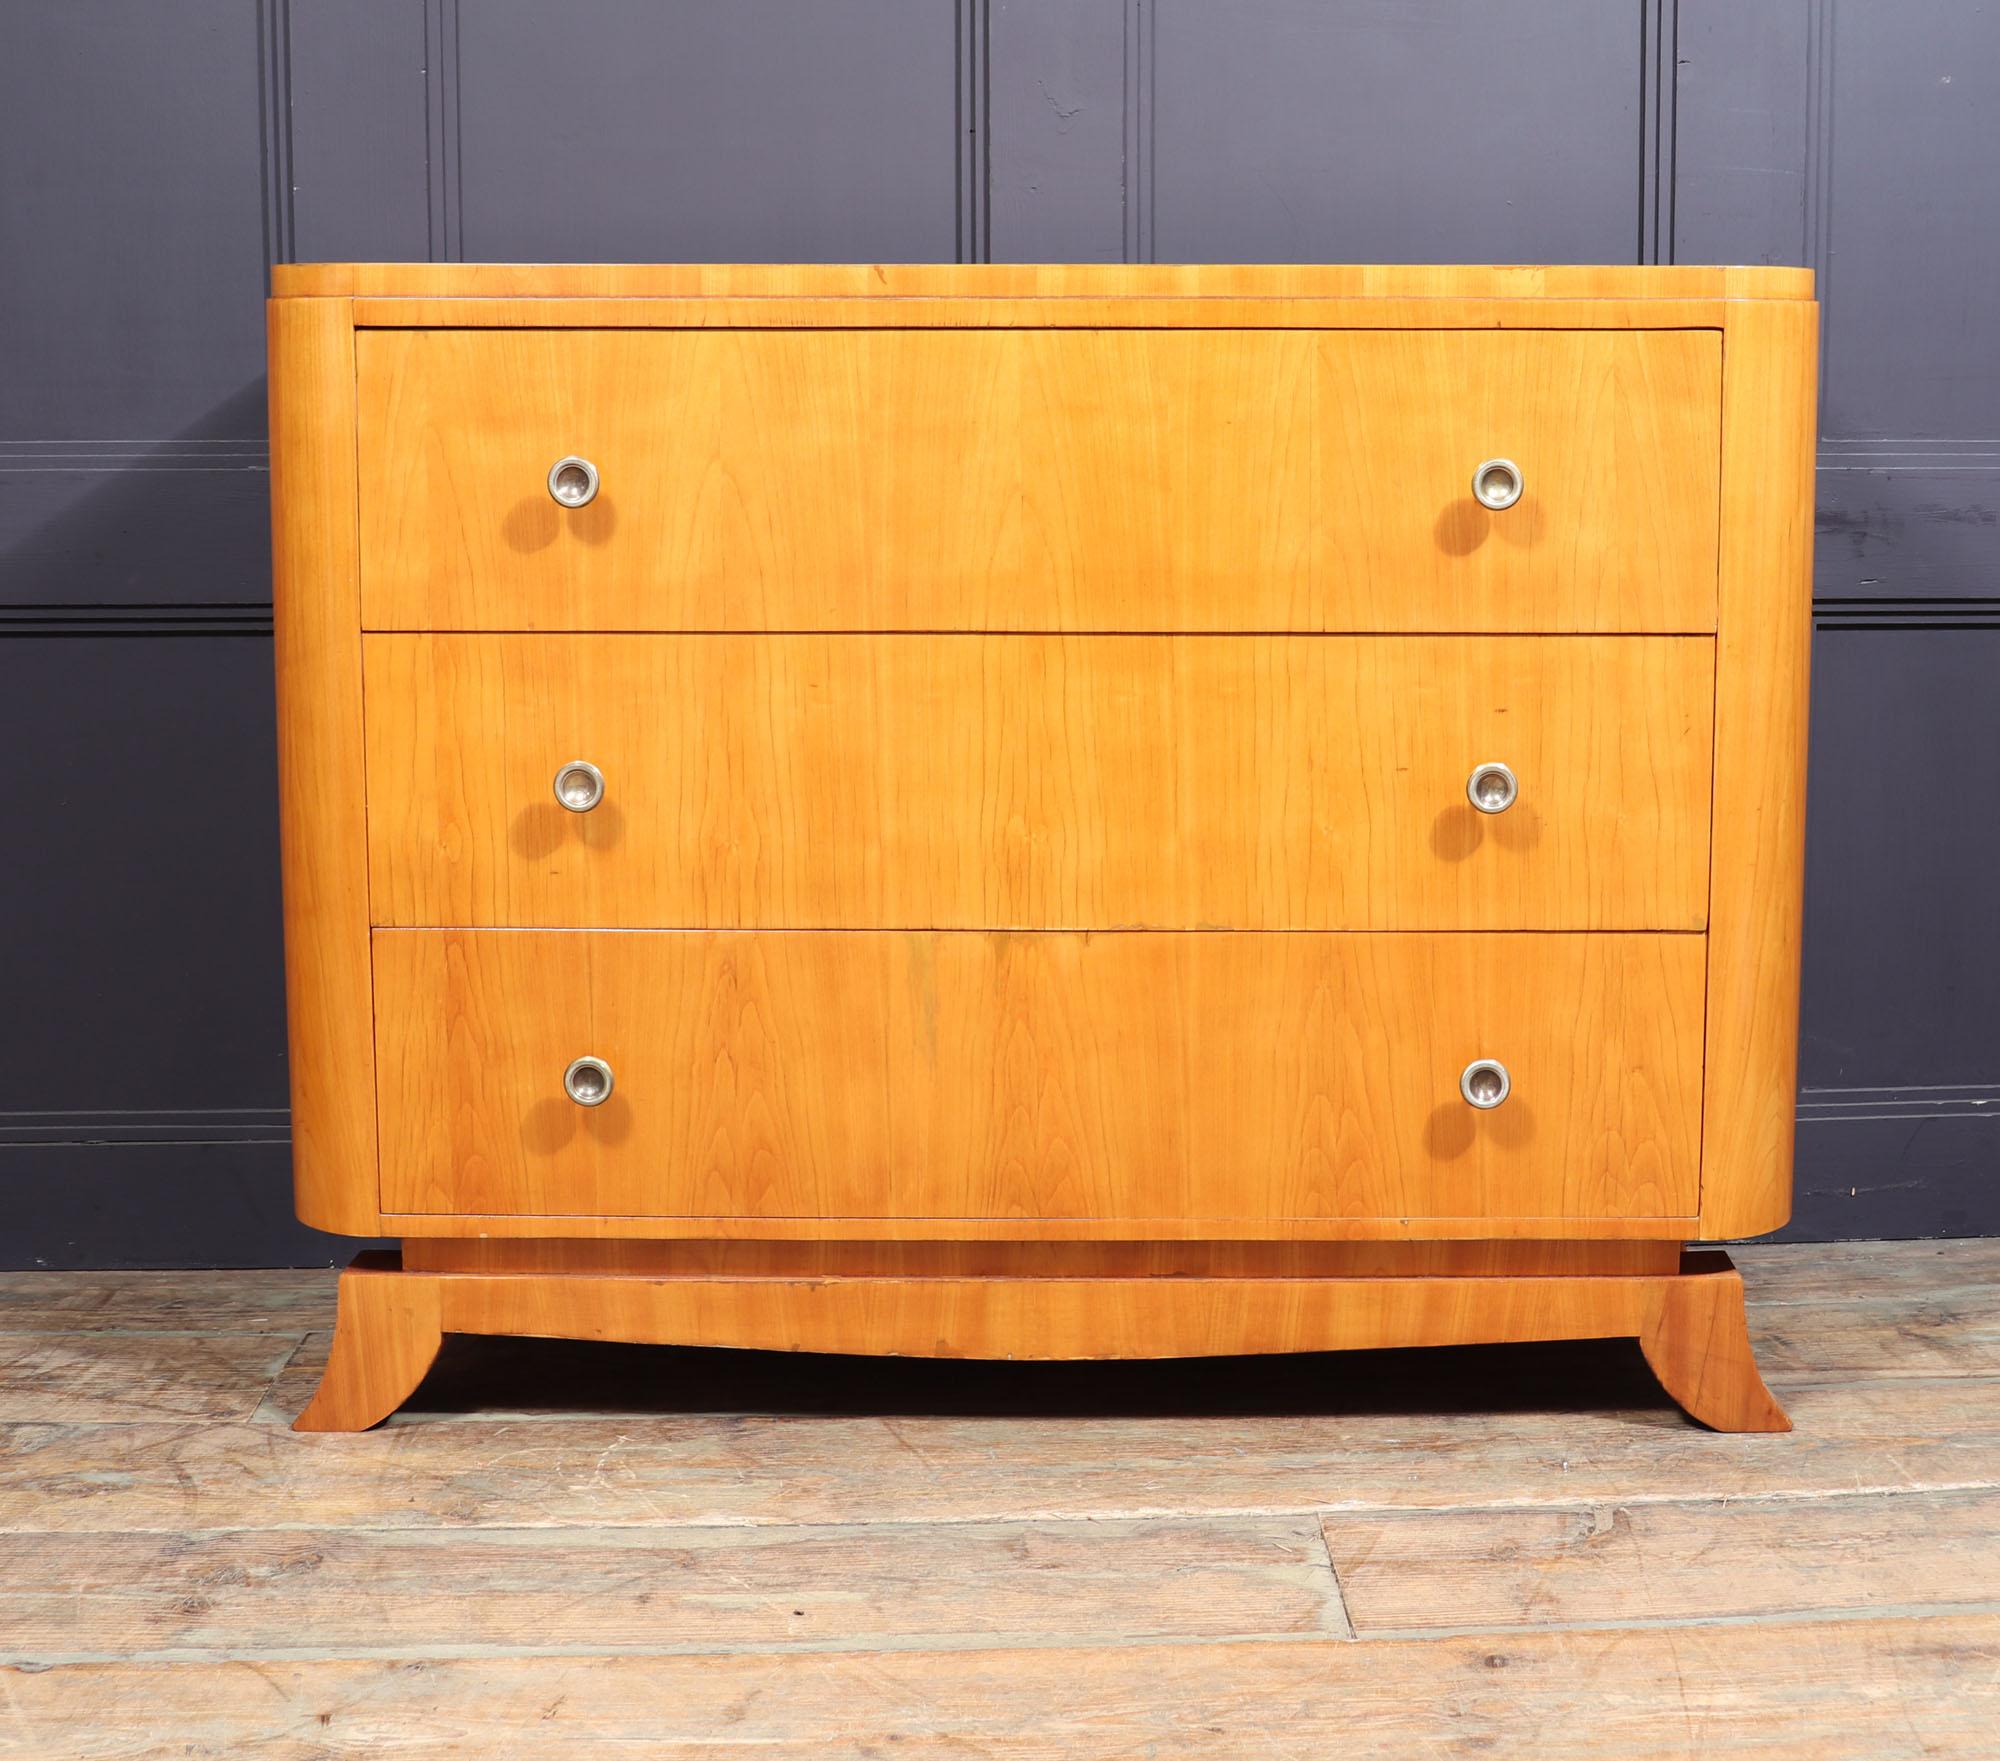 Art Deco chest of drawers.
A French Art Deco chest of drawers produced in cherrywood having three long drawers with brass handles, the chest is wide and slim and stands on a nicely shaped base raised by short sabre feet. The chest has been fully